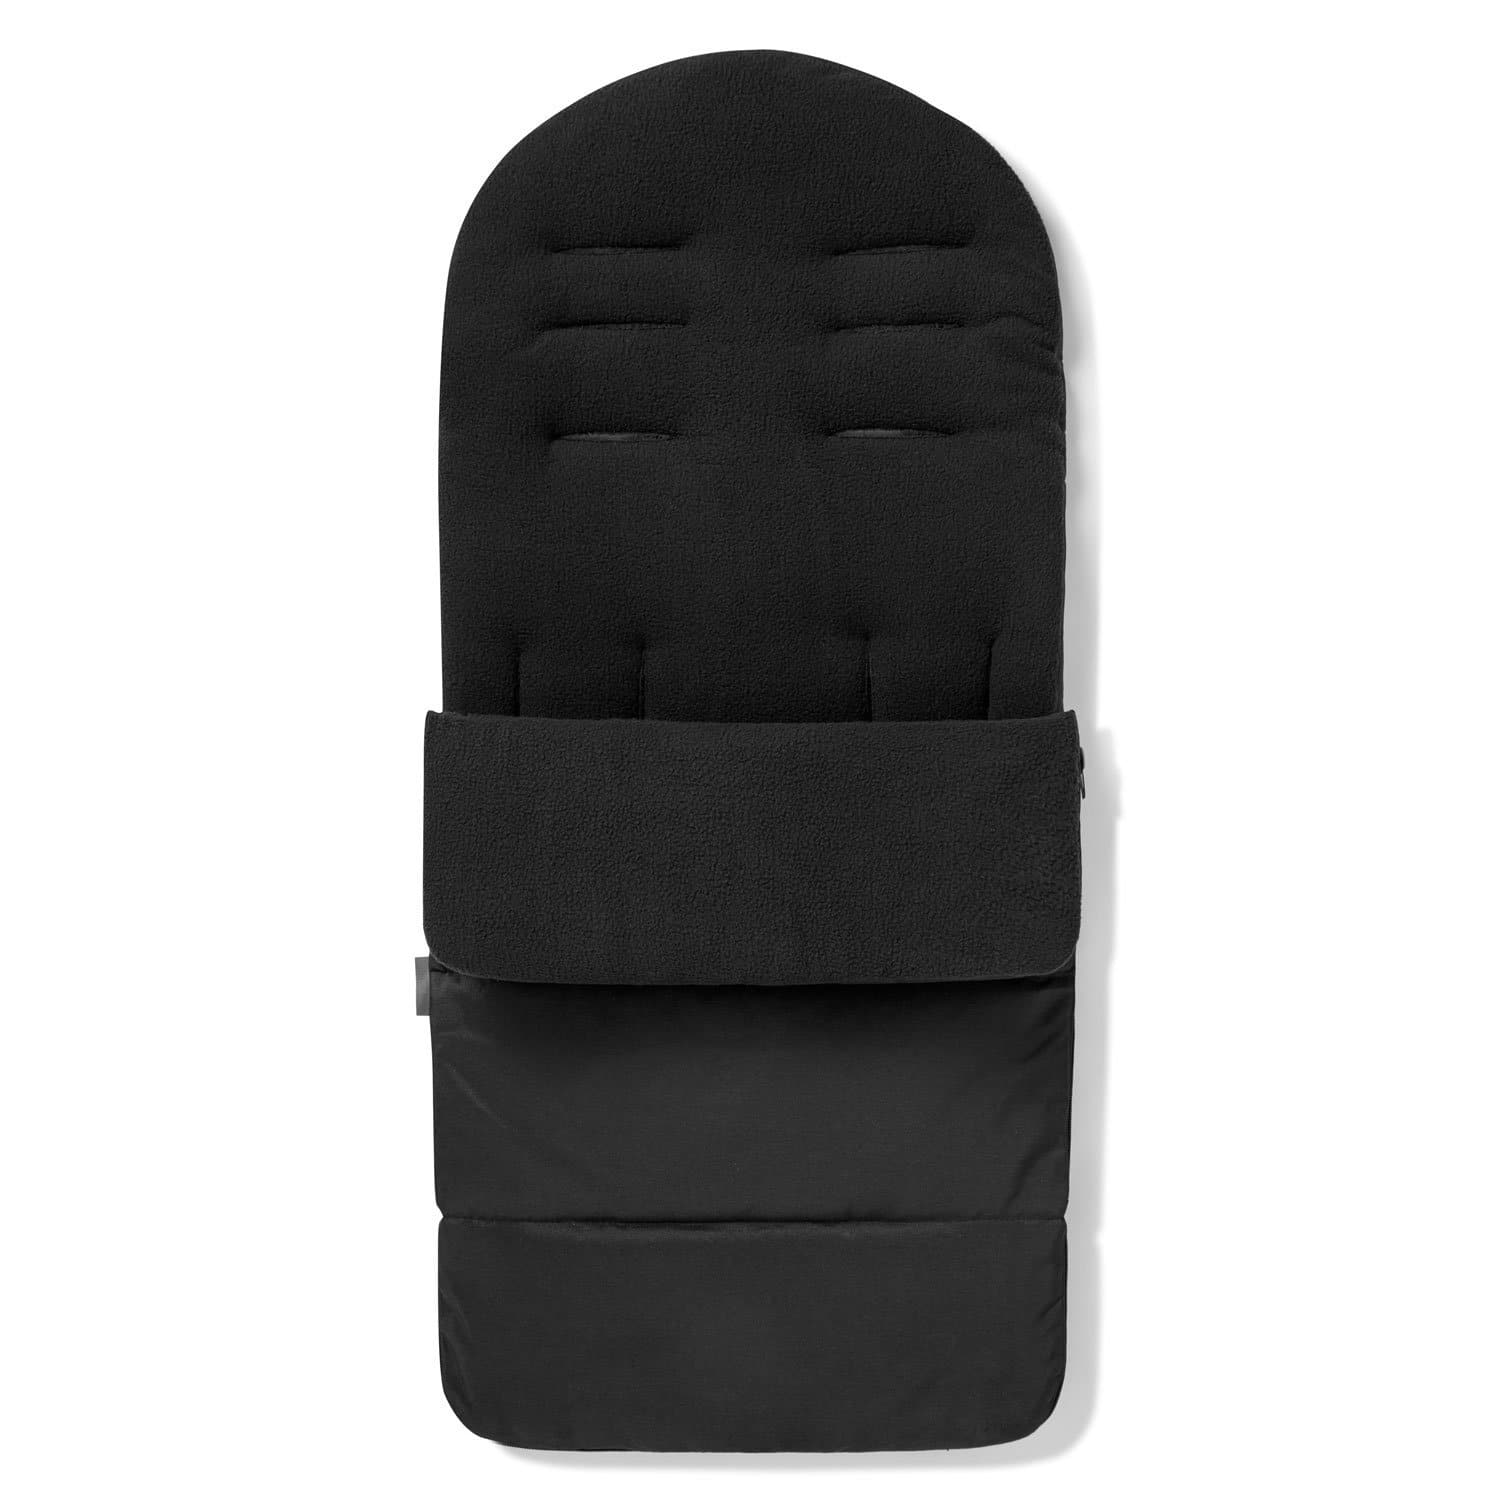 Premium Footmuff / Cosy Toes Compatible with Joolz - Black Jack / Fits All Models | For Your Little One